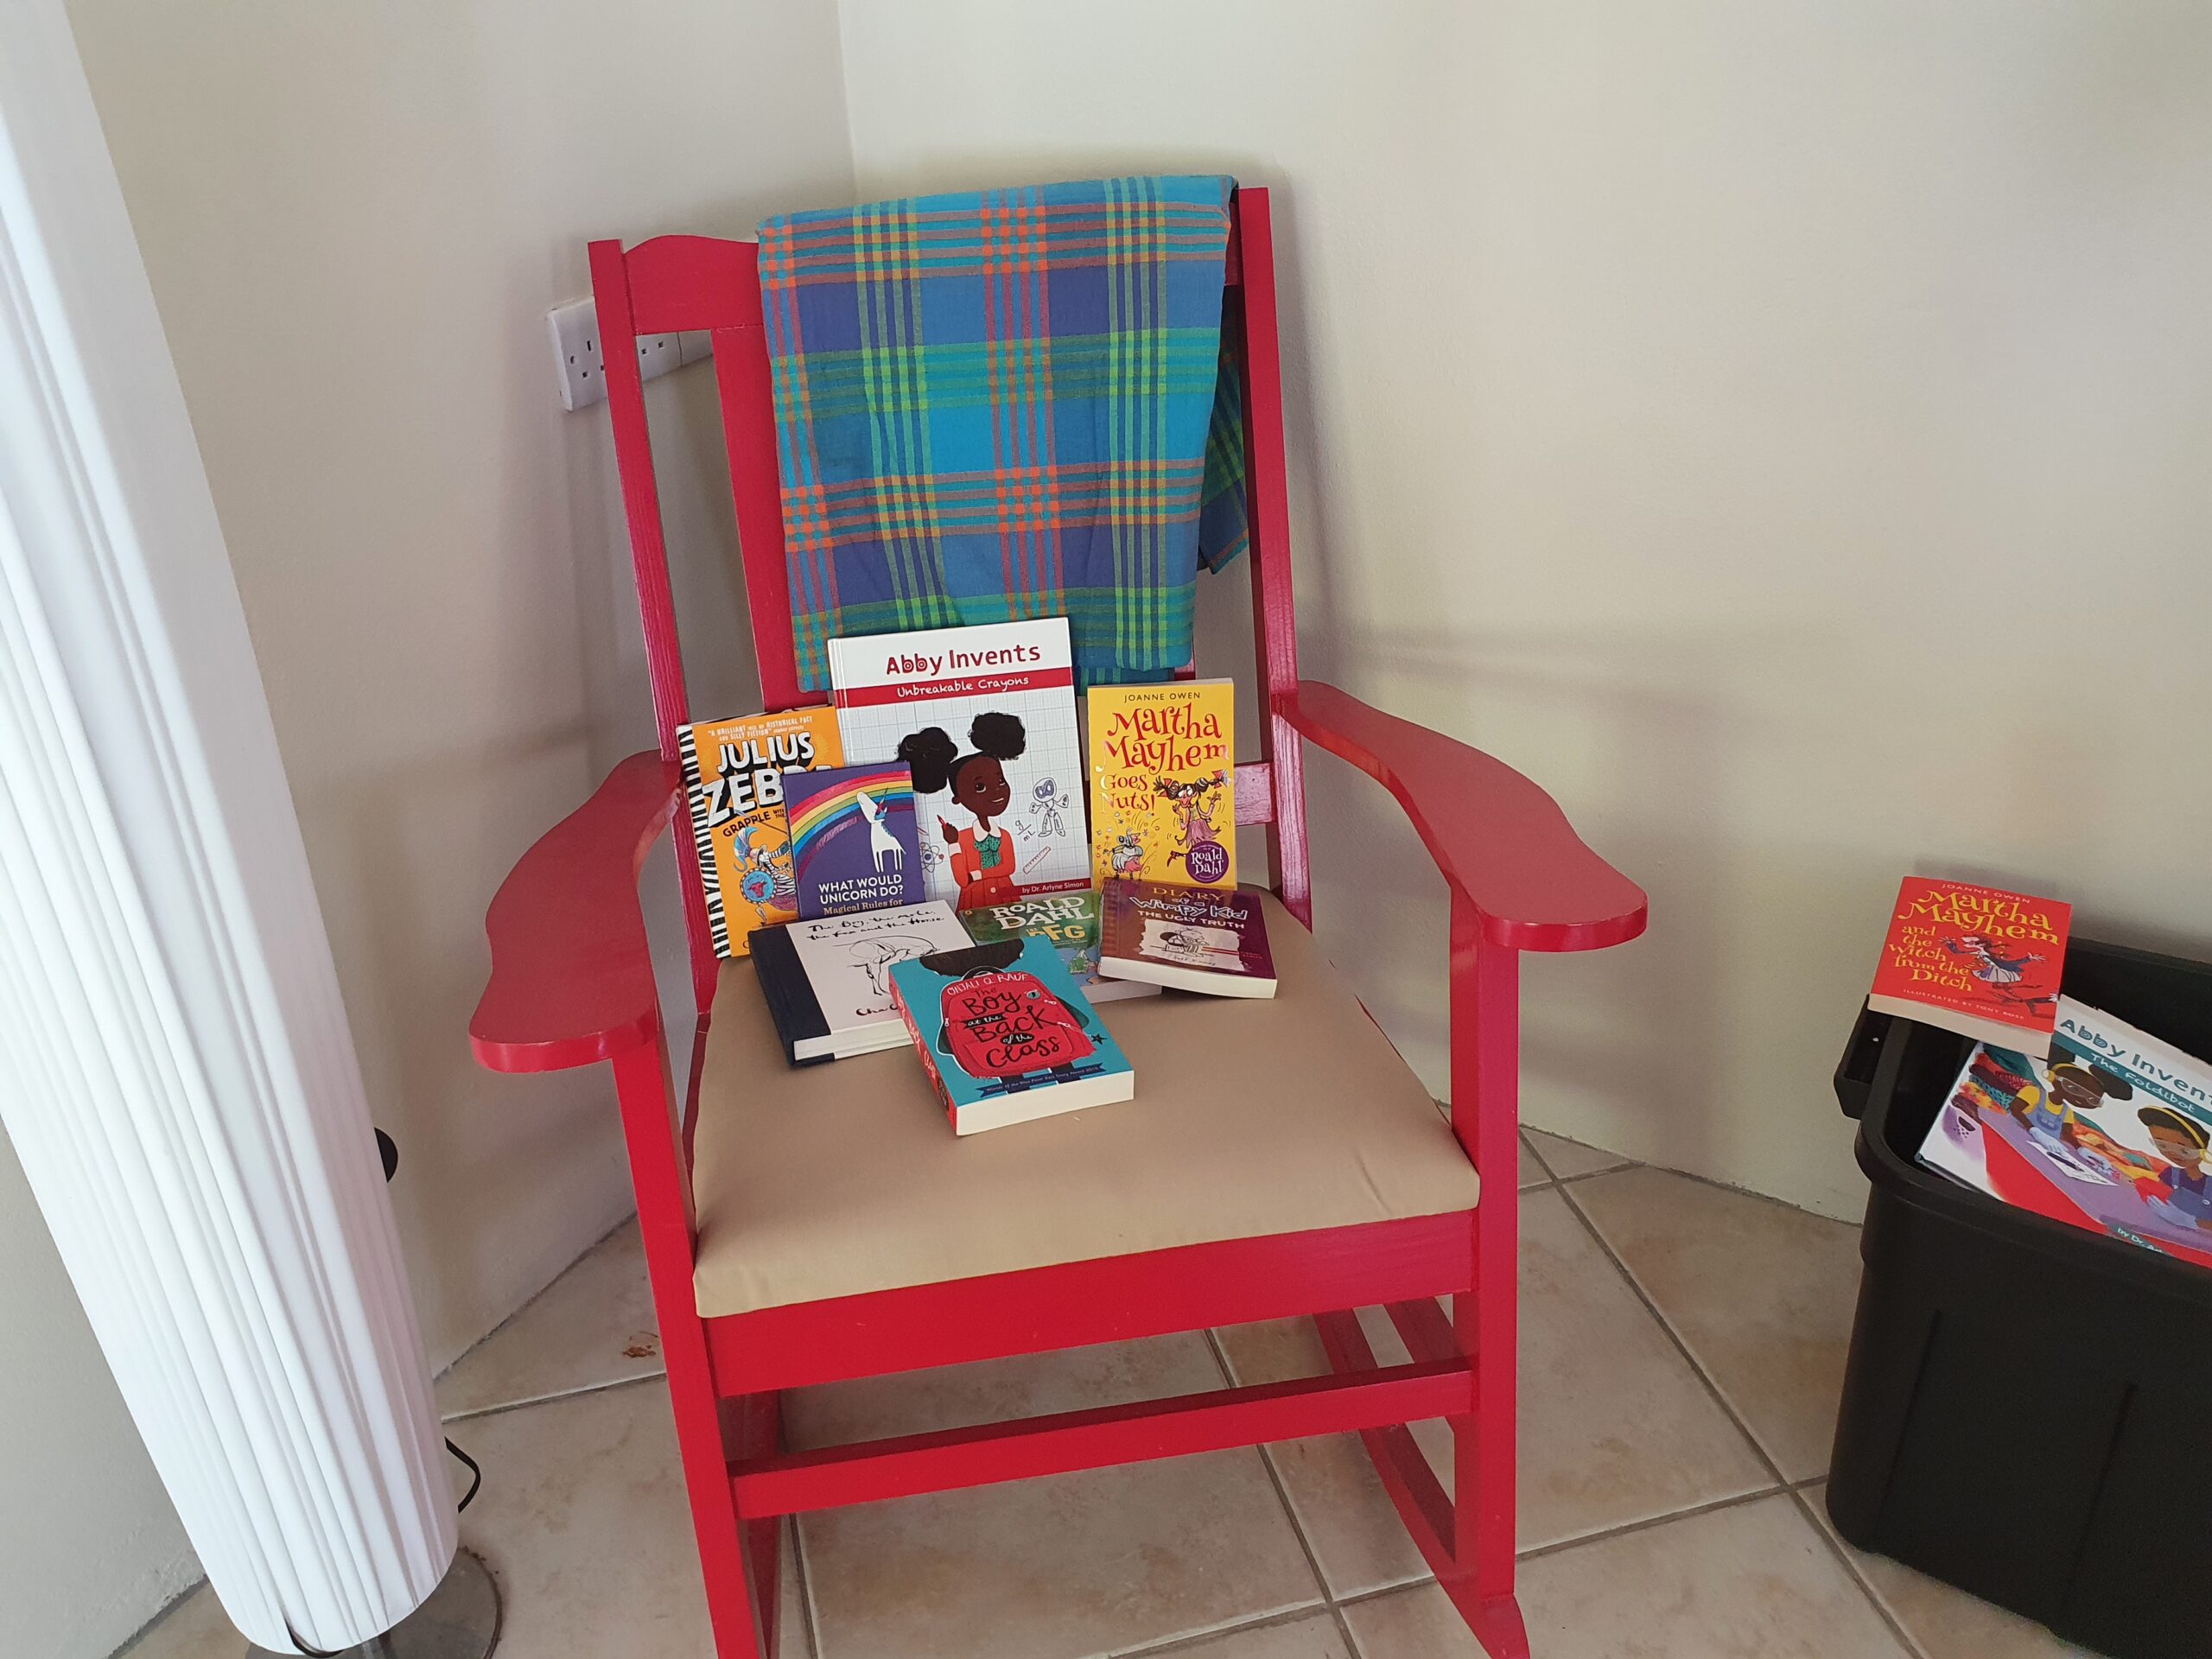 My rocking chair ready for the reading nook